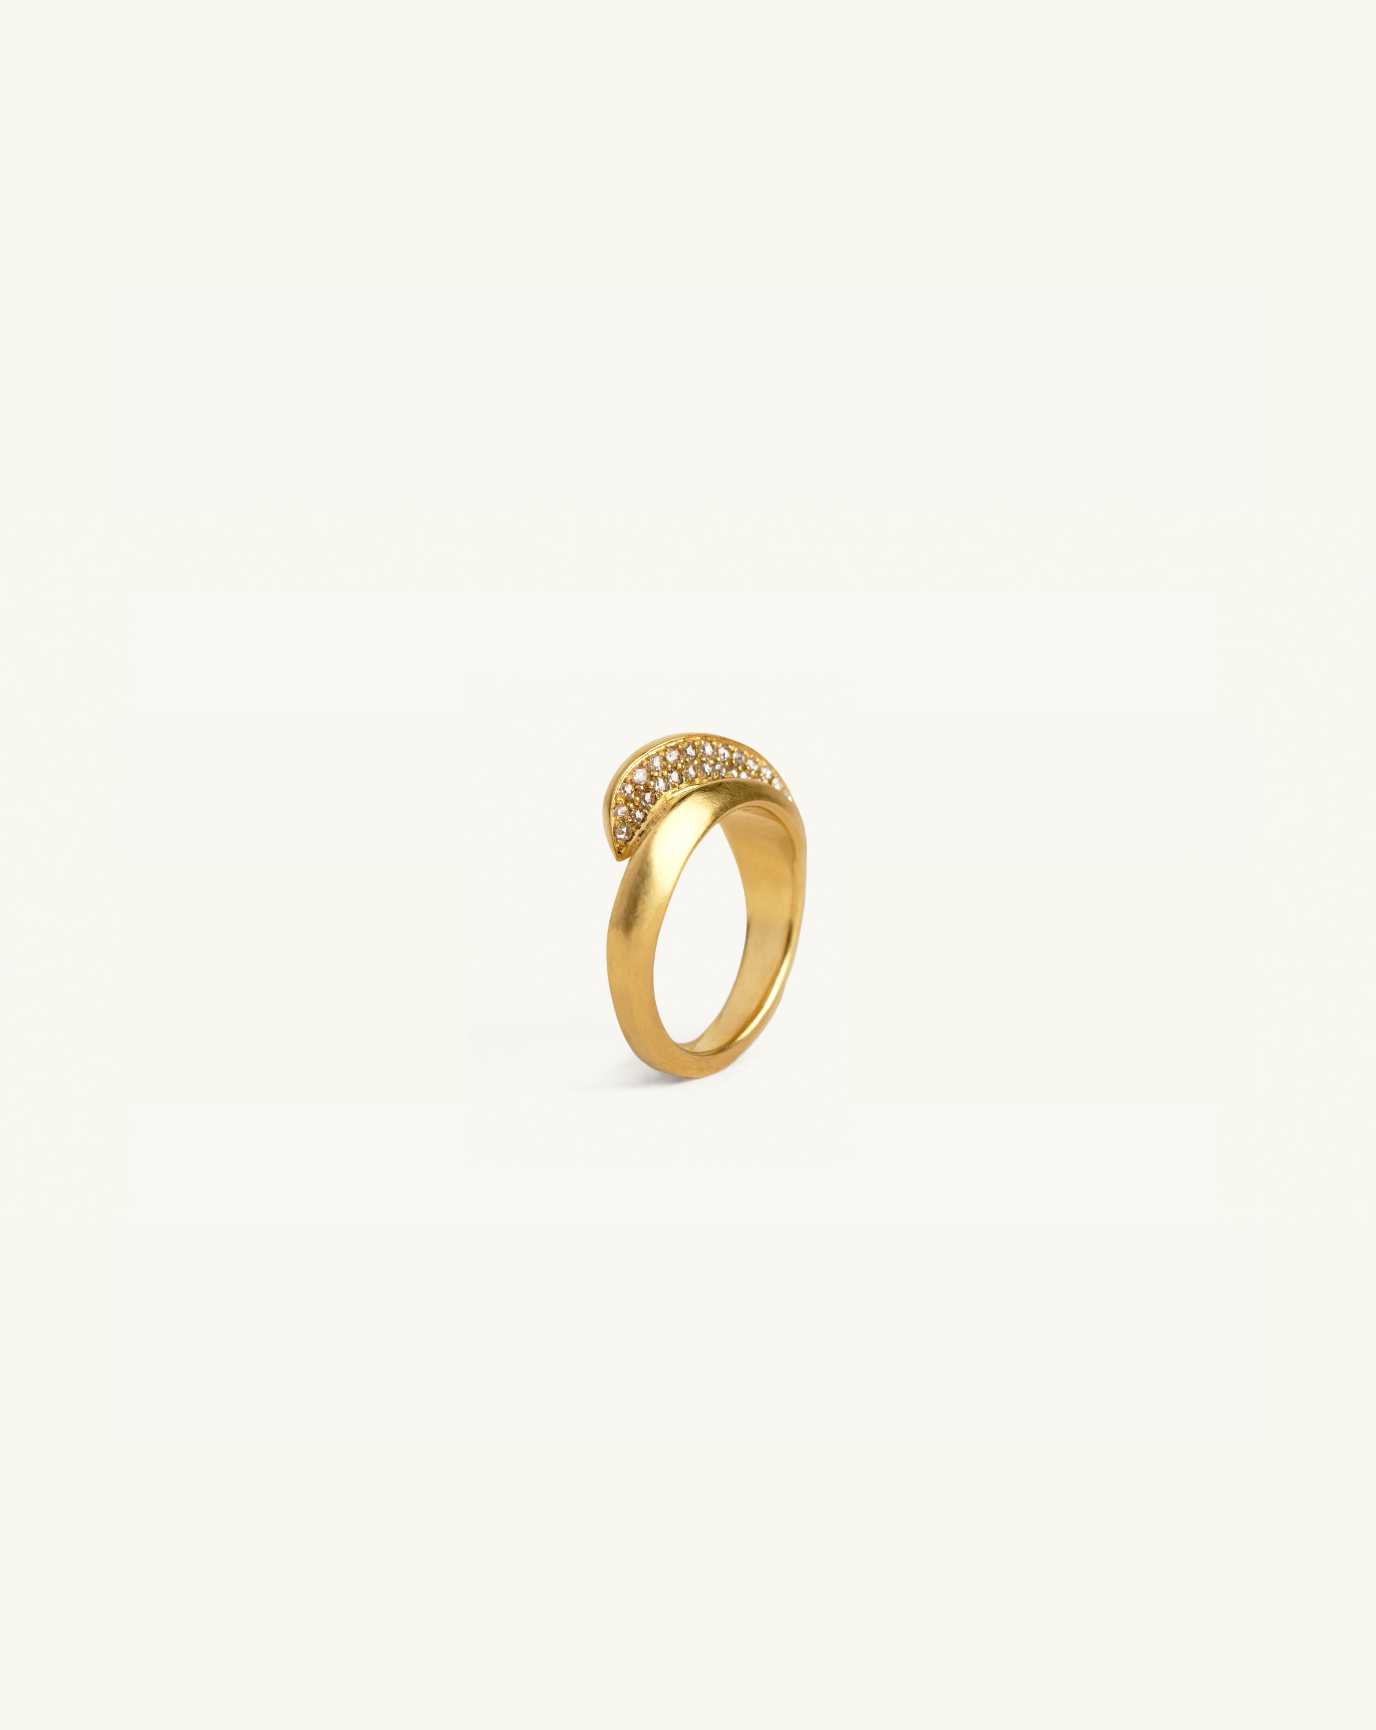 Product image of the sculptural ring in gold with white diamond pavé